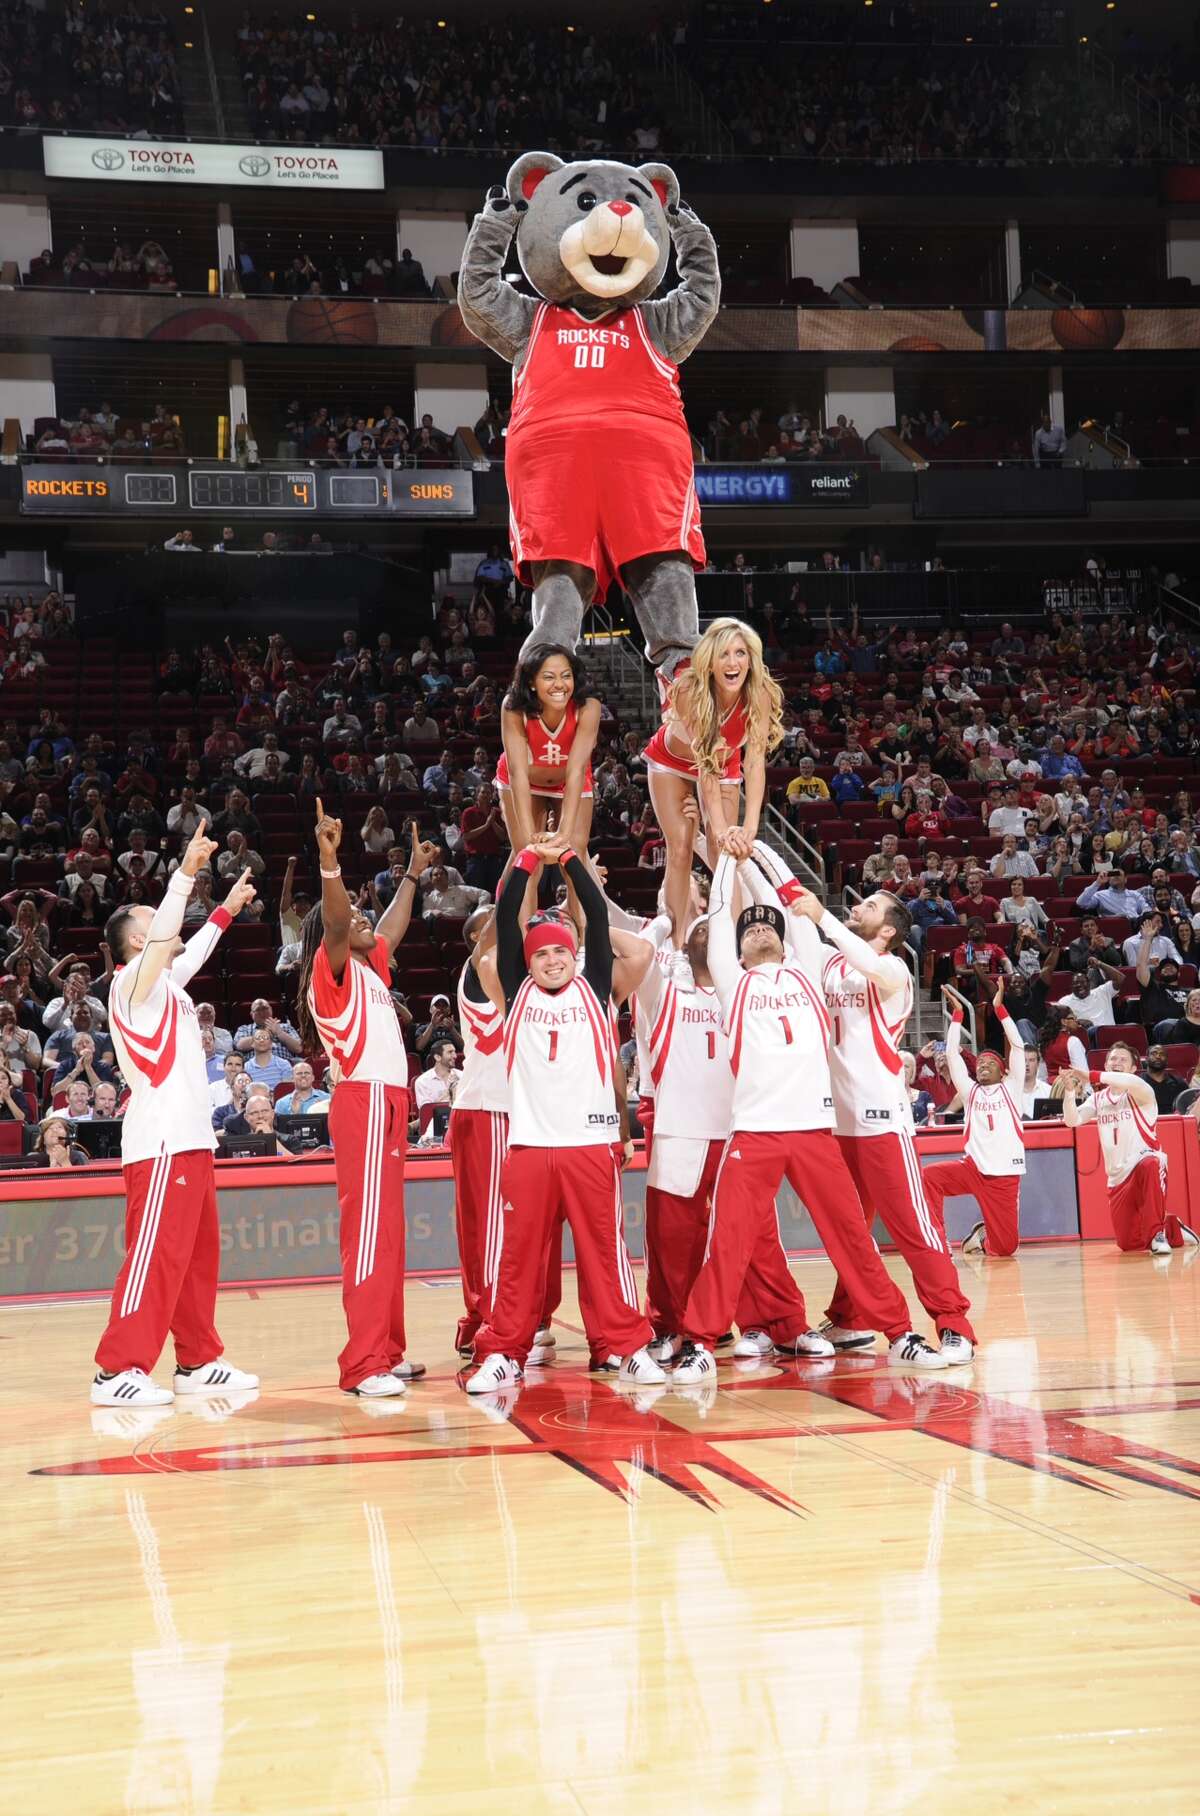 Clutch at the top of the pyramid at a Rockets game. HOUSTON, TX - MARCH 13: The Launch Crew and Clutch Mascot of the Houston Rockets perform during the game against the Phoenix Suns on March 13, 2013 at the Toyota Center in Houston, Texas. NOTE TO USER: User expressly acknowledges and agrees that, by downloading and or using this photograph, User is consenting to the terms and conditions of the Getty Images License Agreement. Mandatory Copyright Notice: Copyright 2013 NBAE (Photo by Bill Baptist/NBAE via Getty Images)